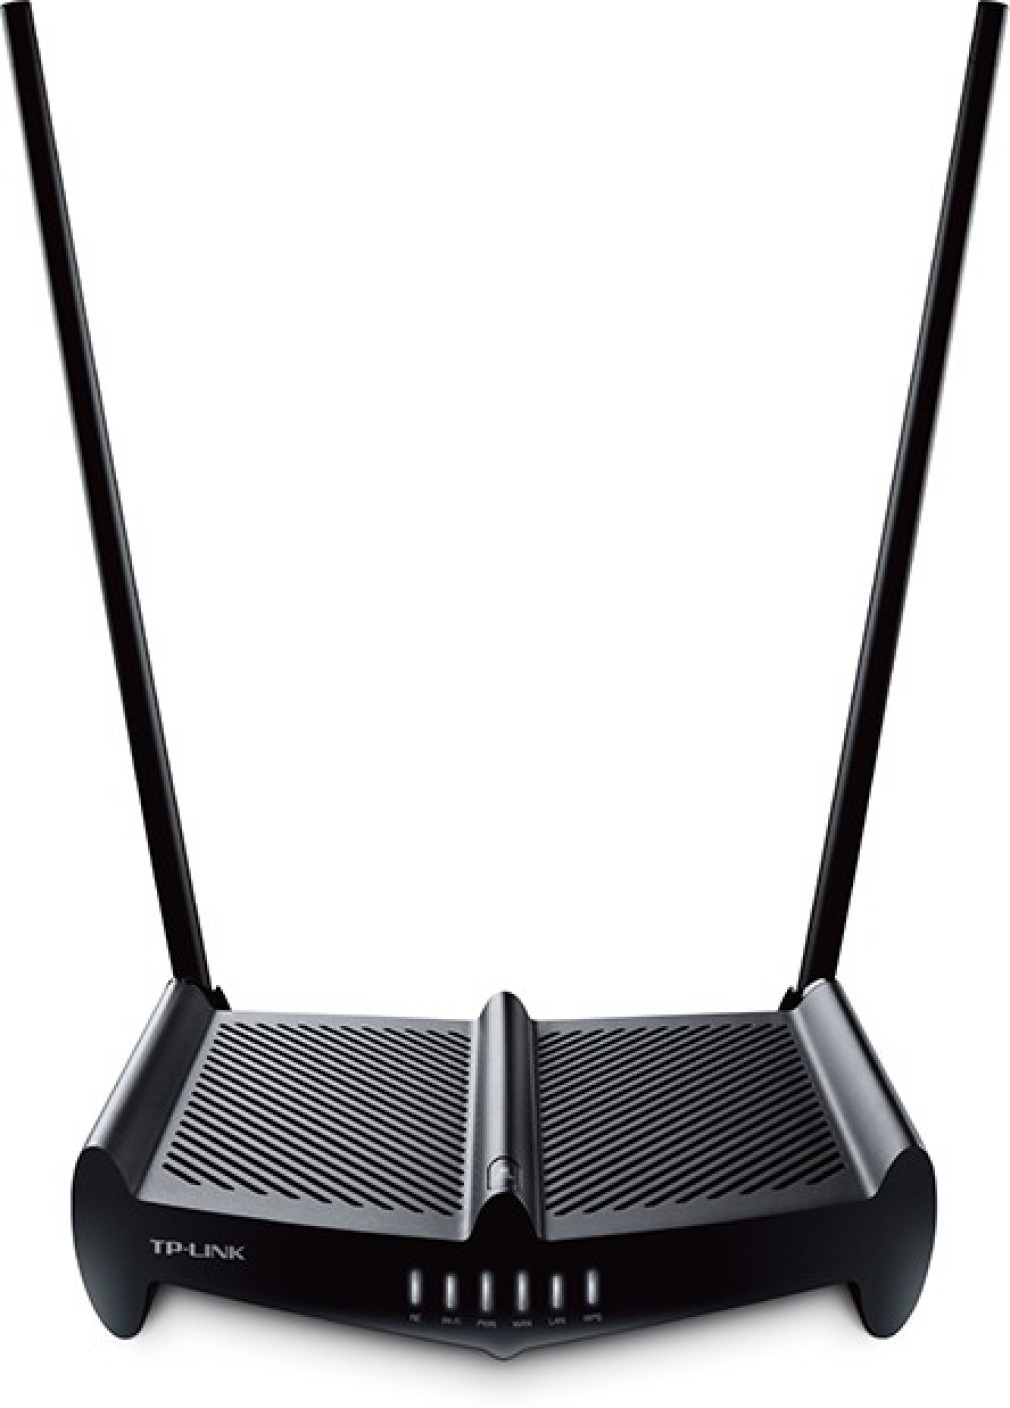  TP Link TL WR841HP 300Mbps High Power Wireless N Router 